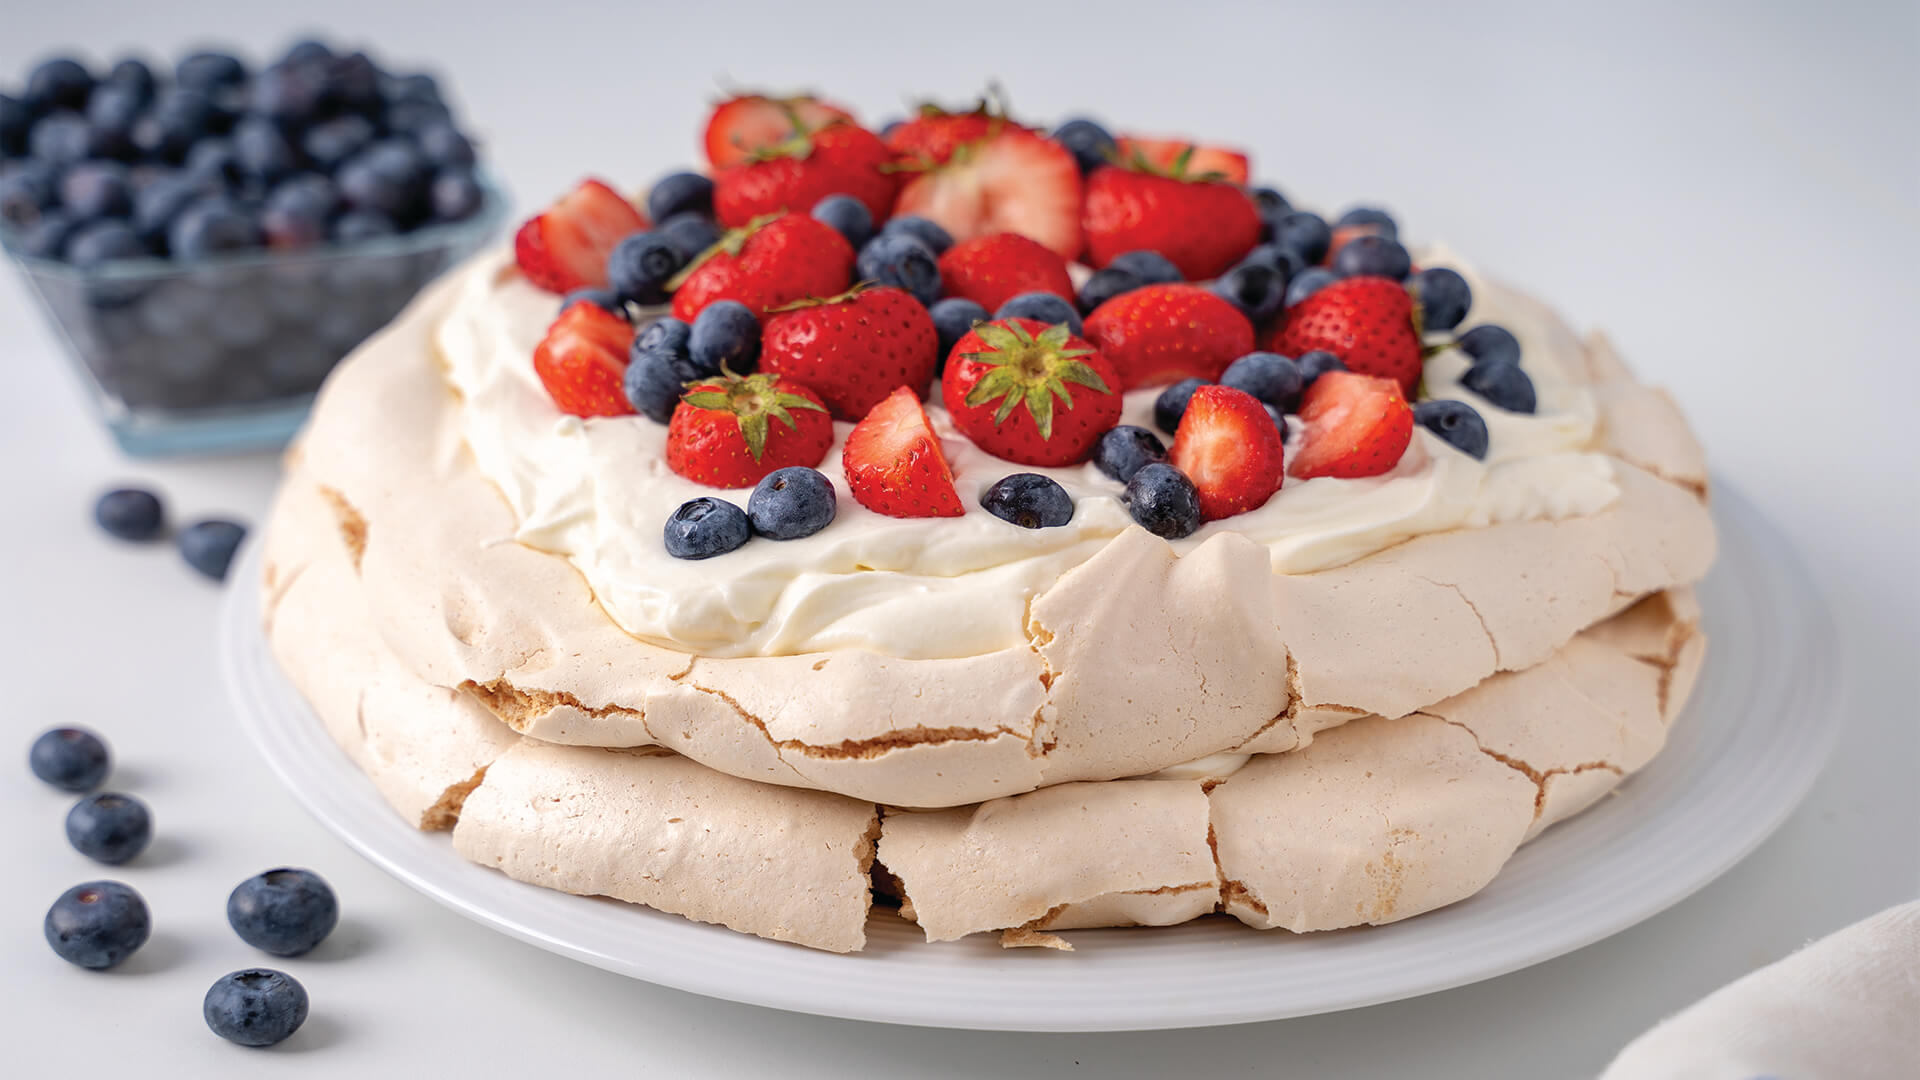 This allergy-friendly pavlova is made without eggs, and uses chickpea brine instead